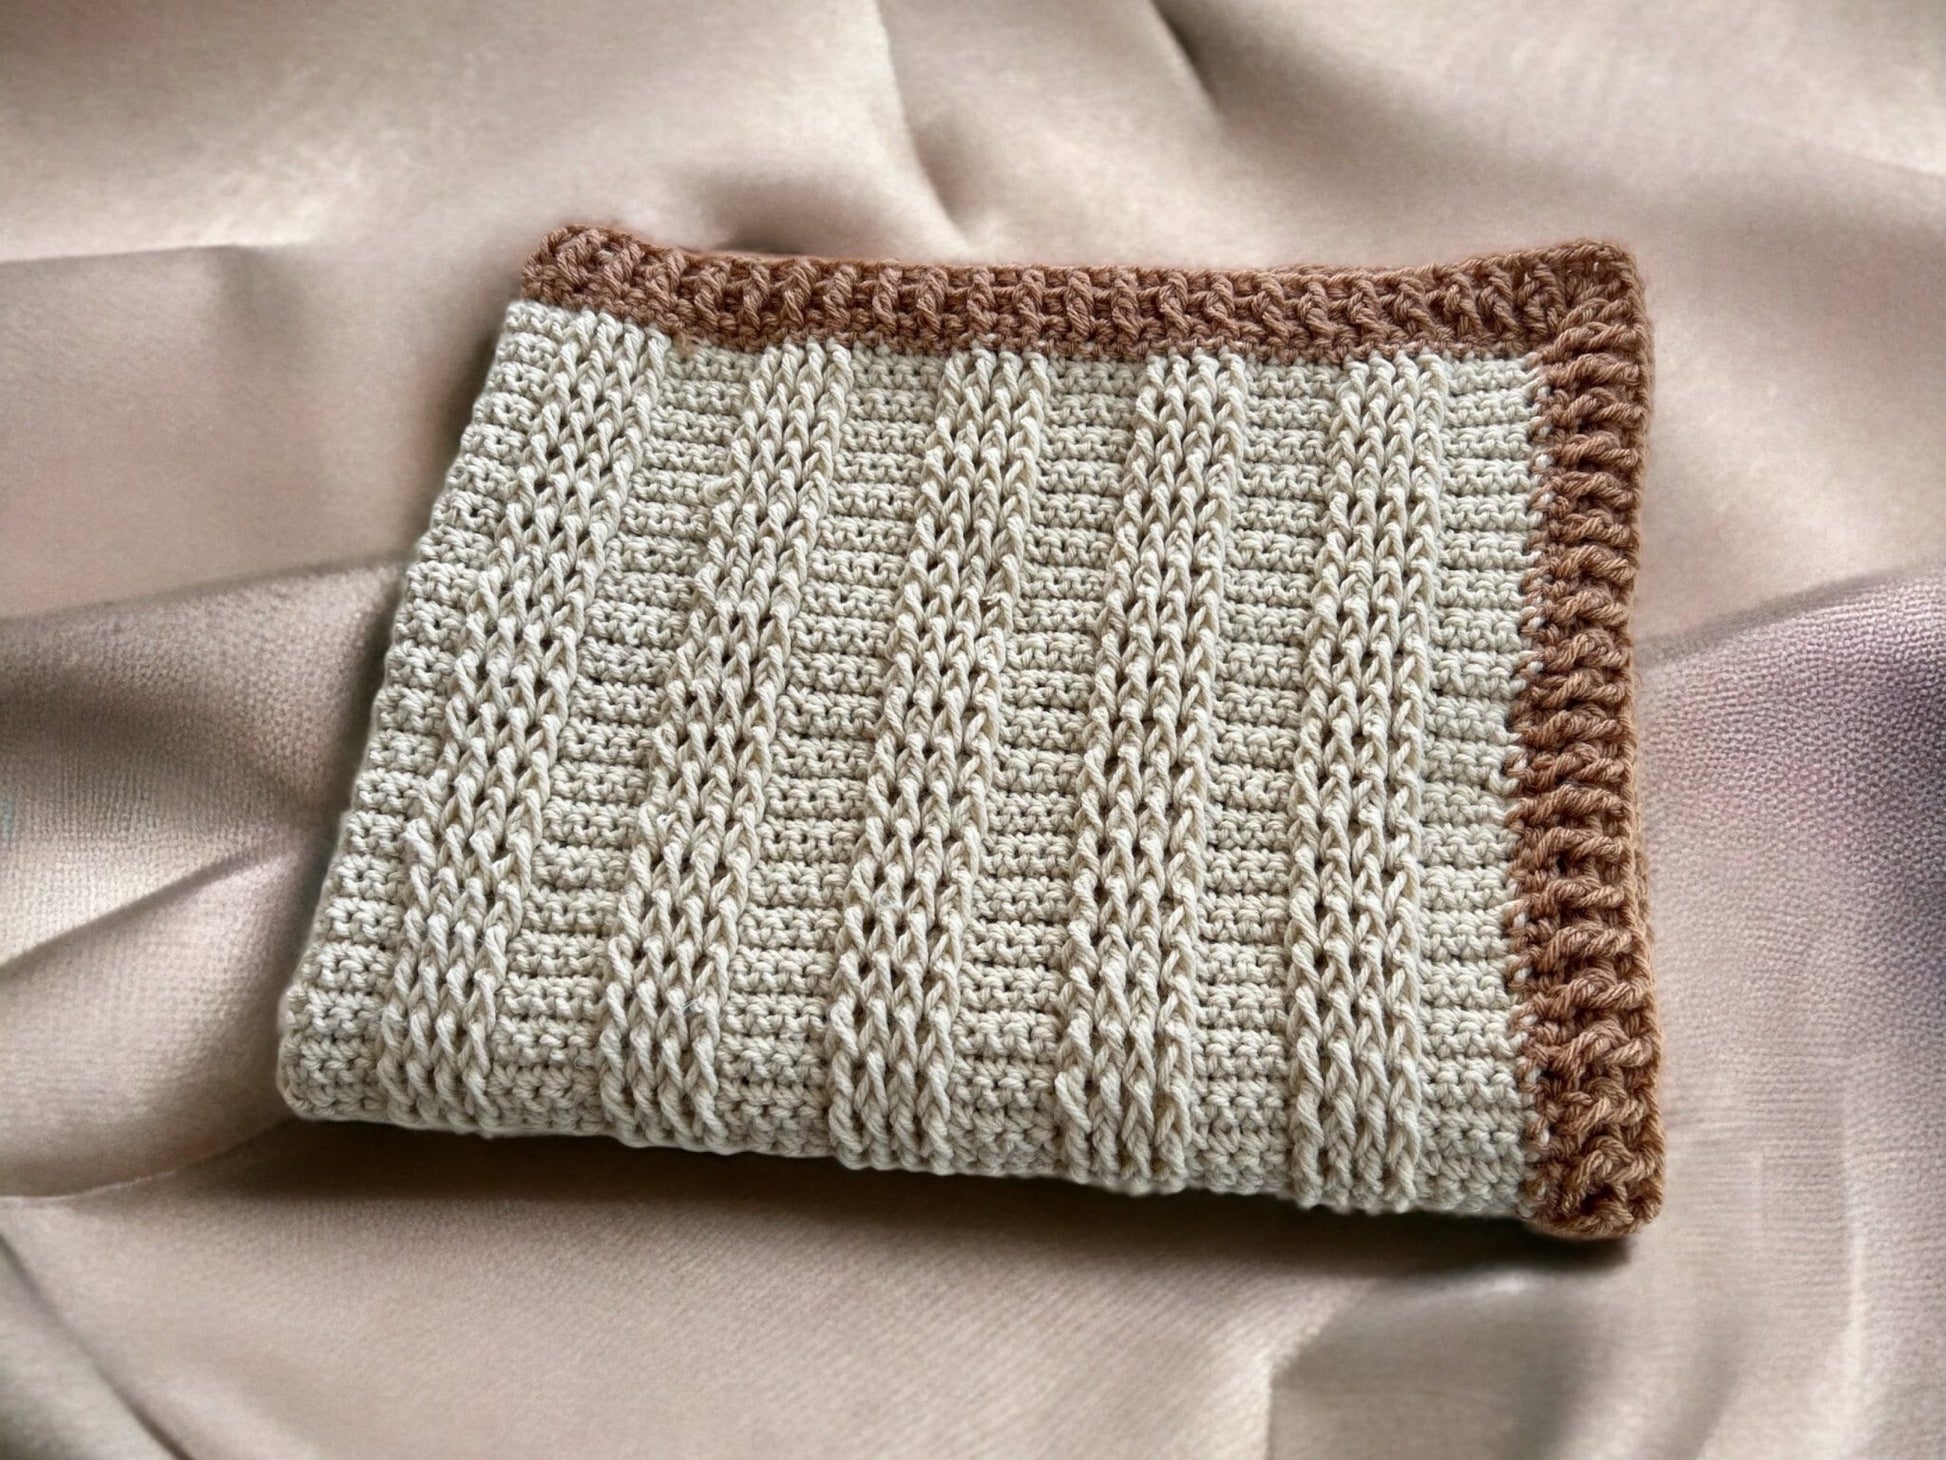 Beige and brown baby blanket, ready to ship modern heirloom blanket, blanket for baby boy- baby shower gift 34”x26”cradle blanket - Lilly Grace Sparkle Boutique